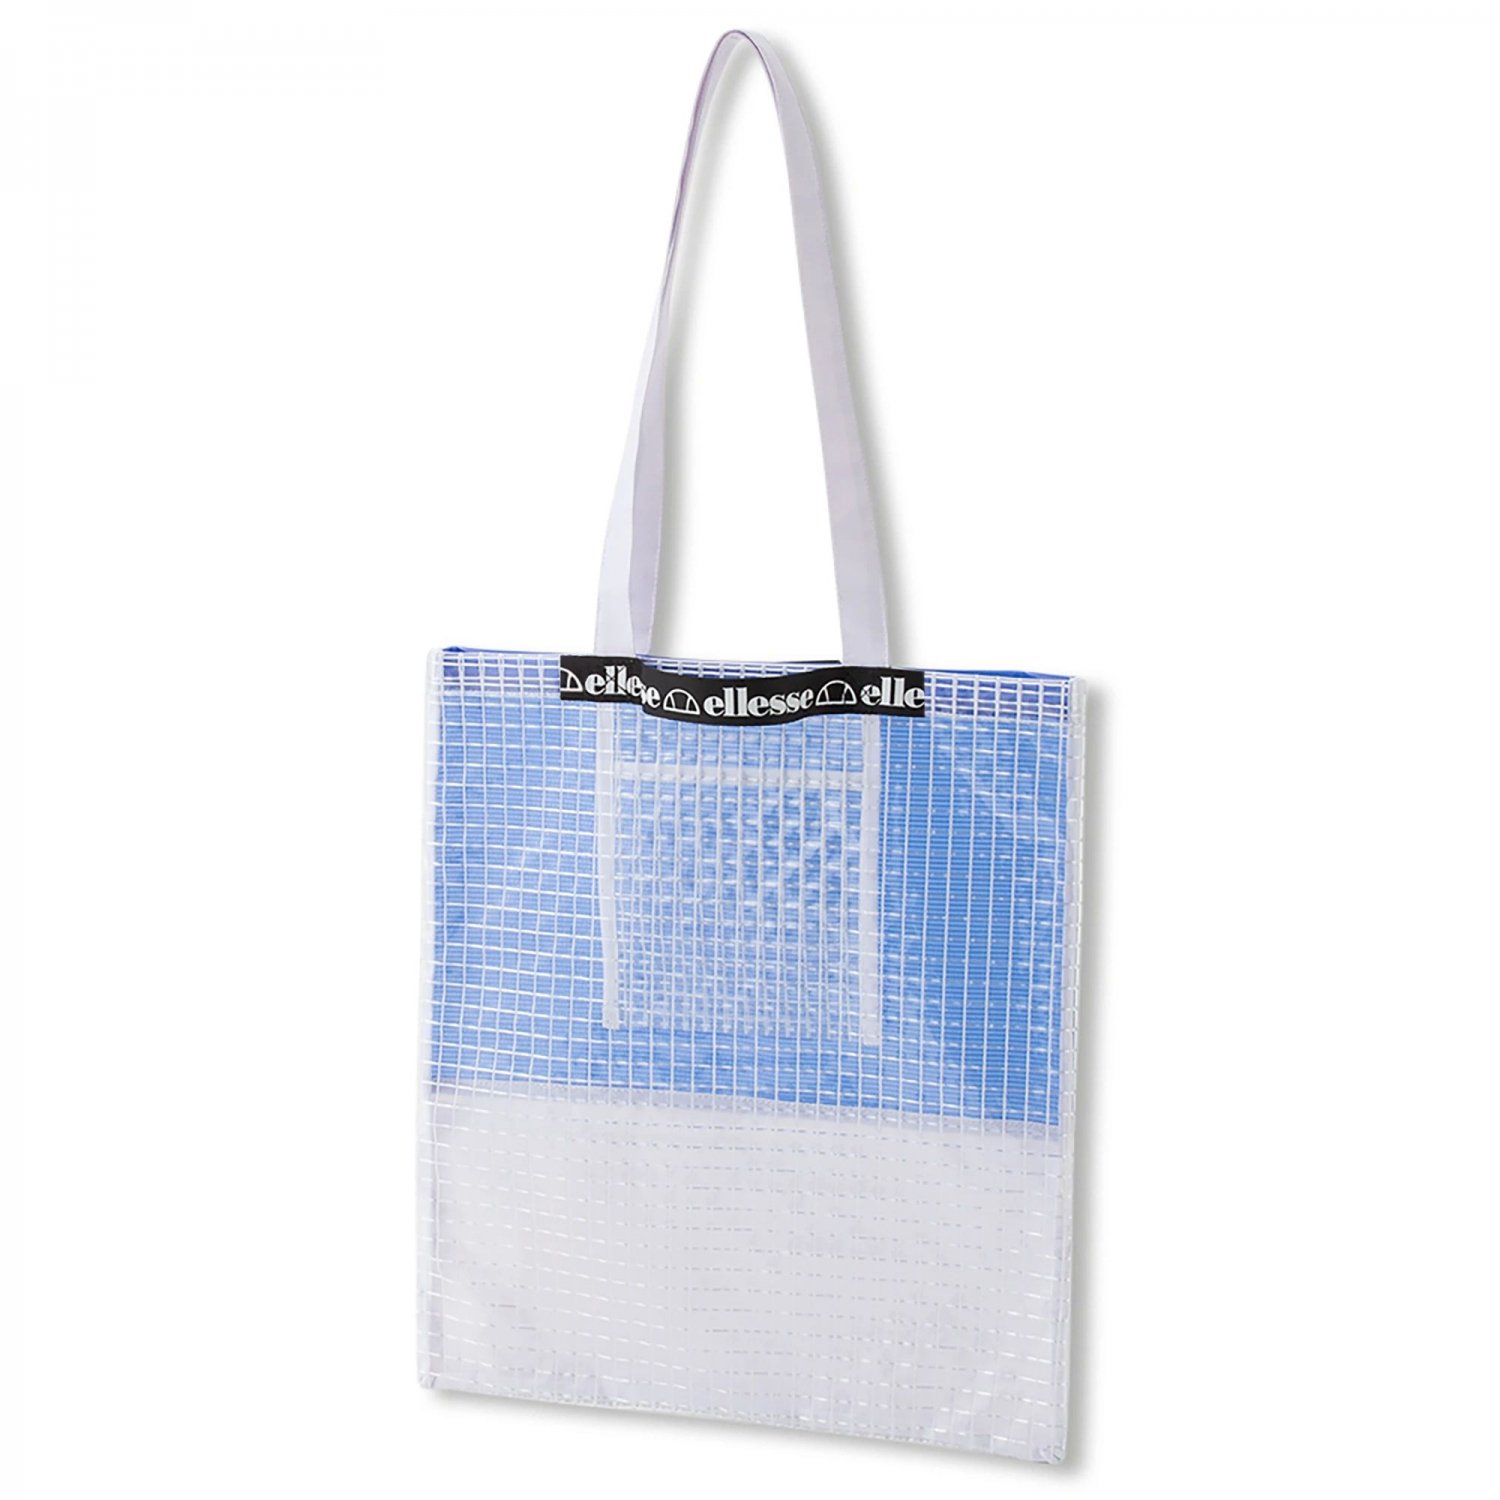 <img class='new_mark_img1' src='https://img.shop-pro.jp/img/new/icons8.gif' style='border:none;display:inline;margin:0px;padding:0px;width:auto;' />ellesse / Colorful Tote